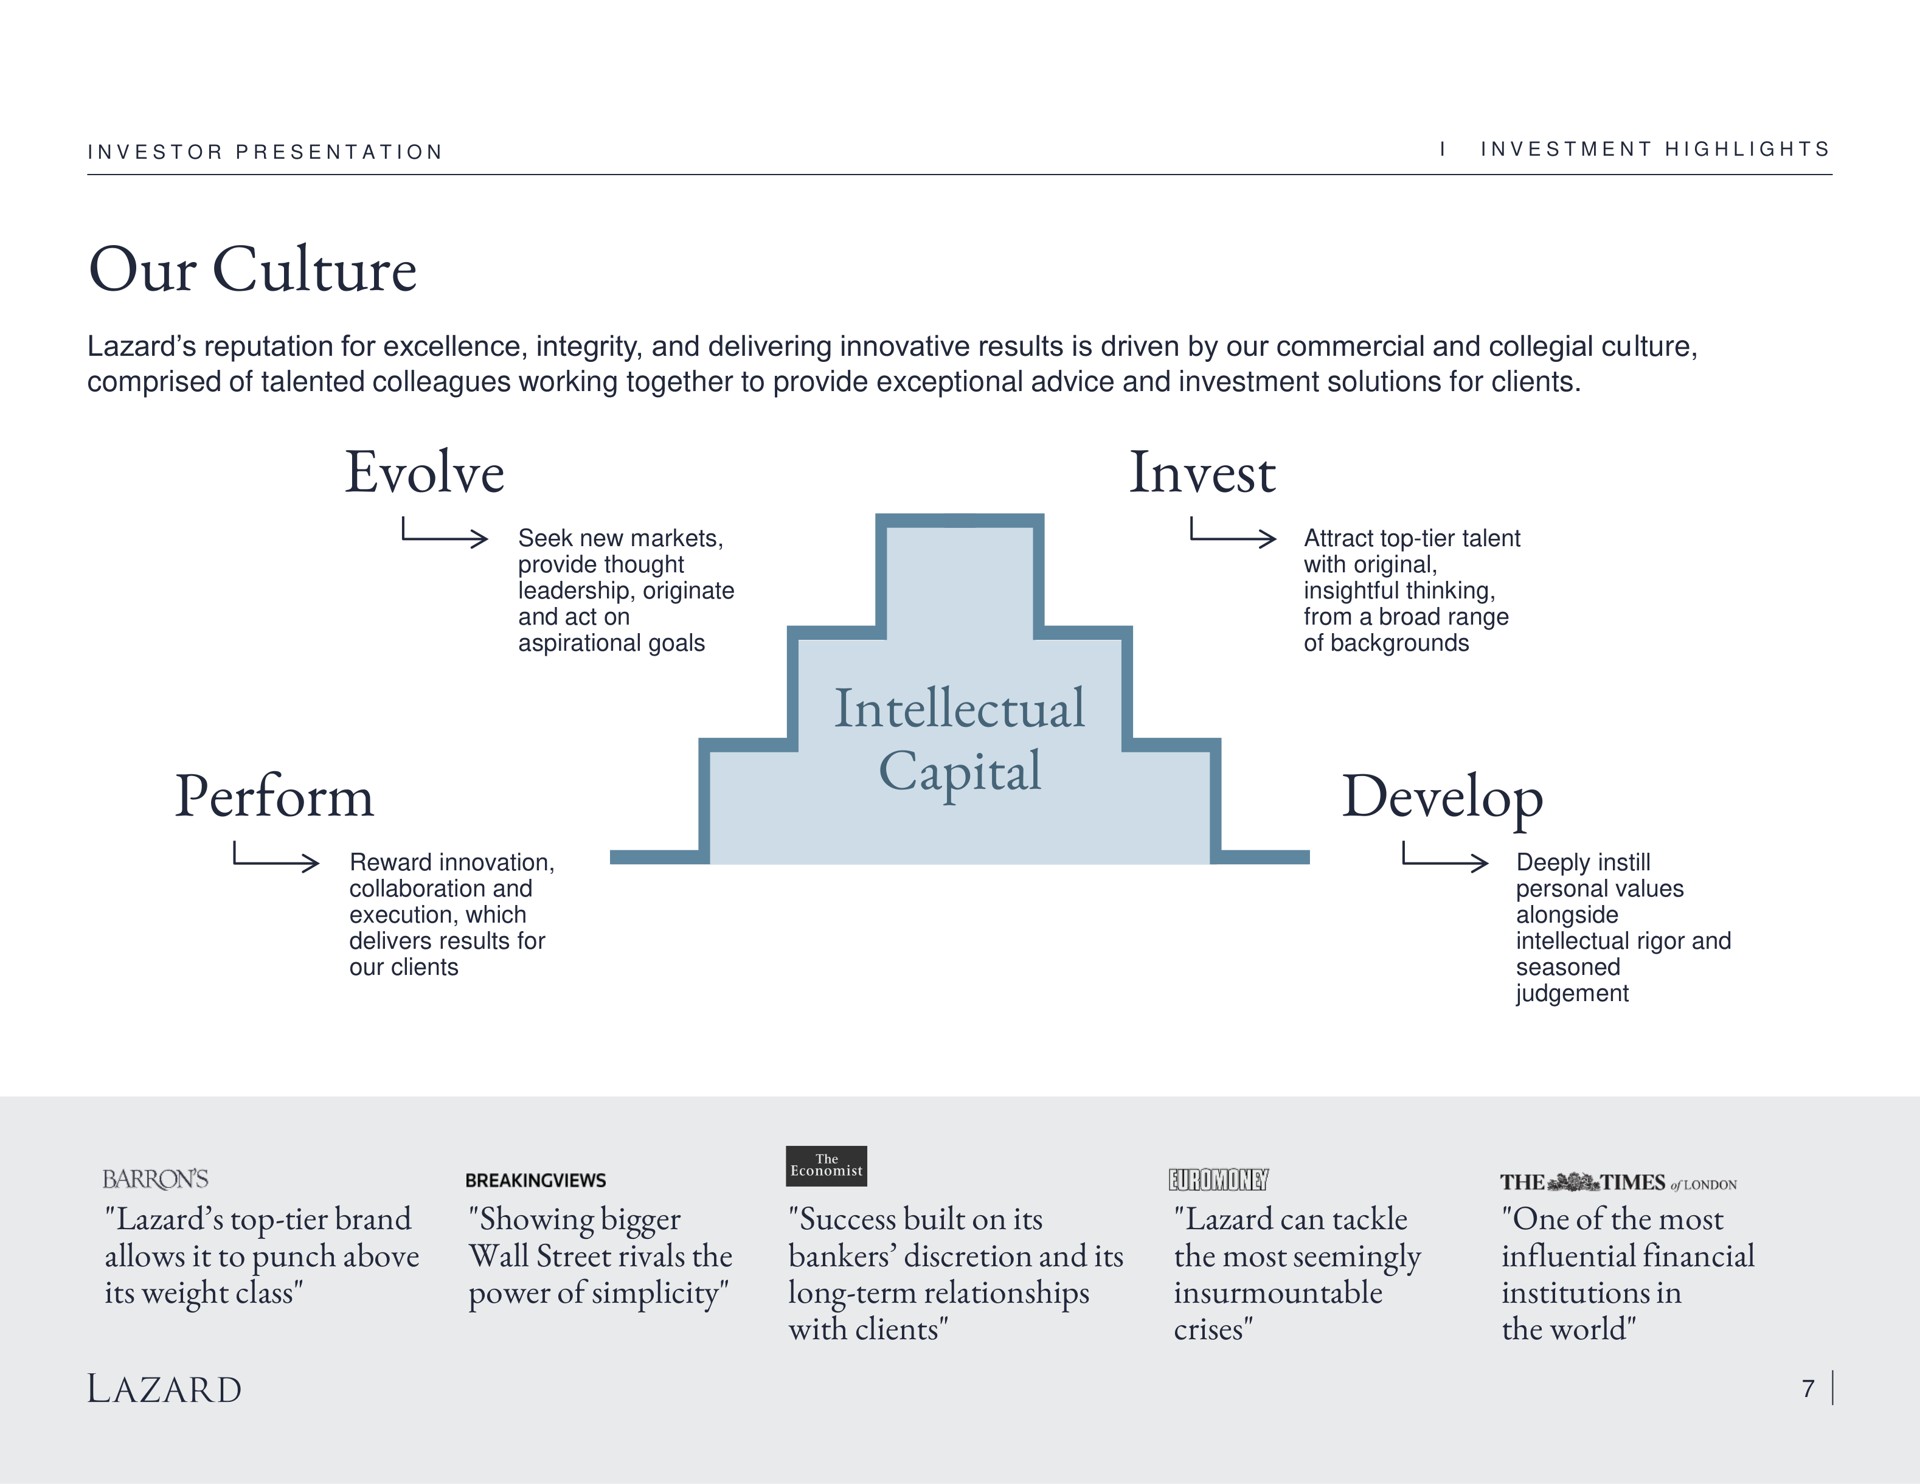 our culture evolve invest intellectual capital perform develop top tier brand allows it to punch above its weight class showing bigger wall street rivals the power of simplicity success built on its bankers discretion and its long term relationships with clients can tackle the most seemingly insurmountable crises one of the most influential financial institutions in the world deeply instill | Lazard